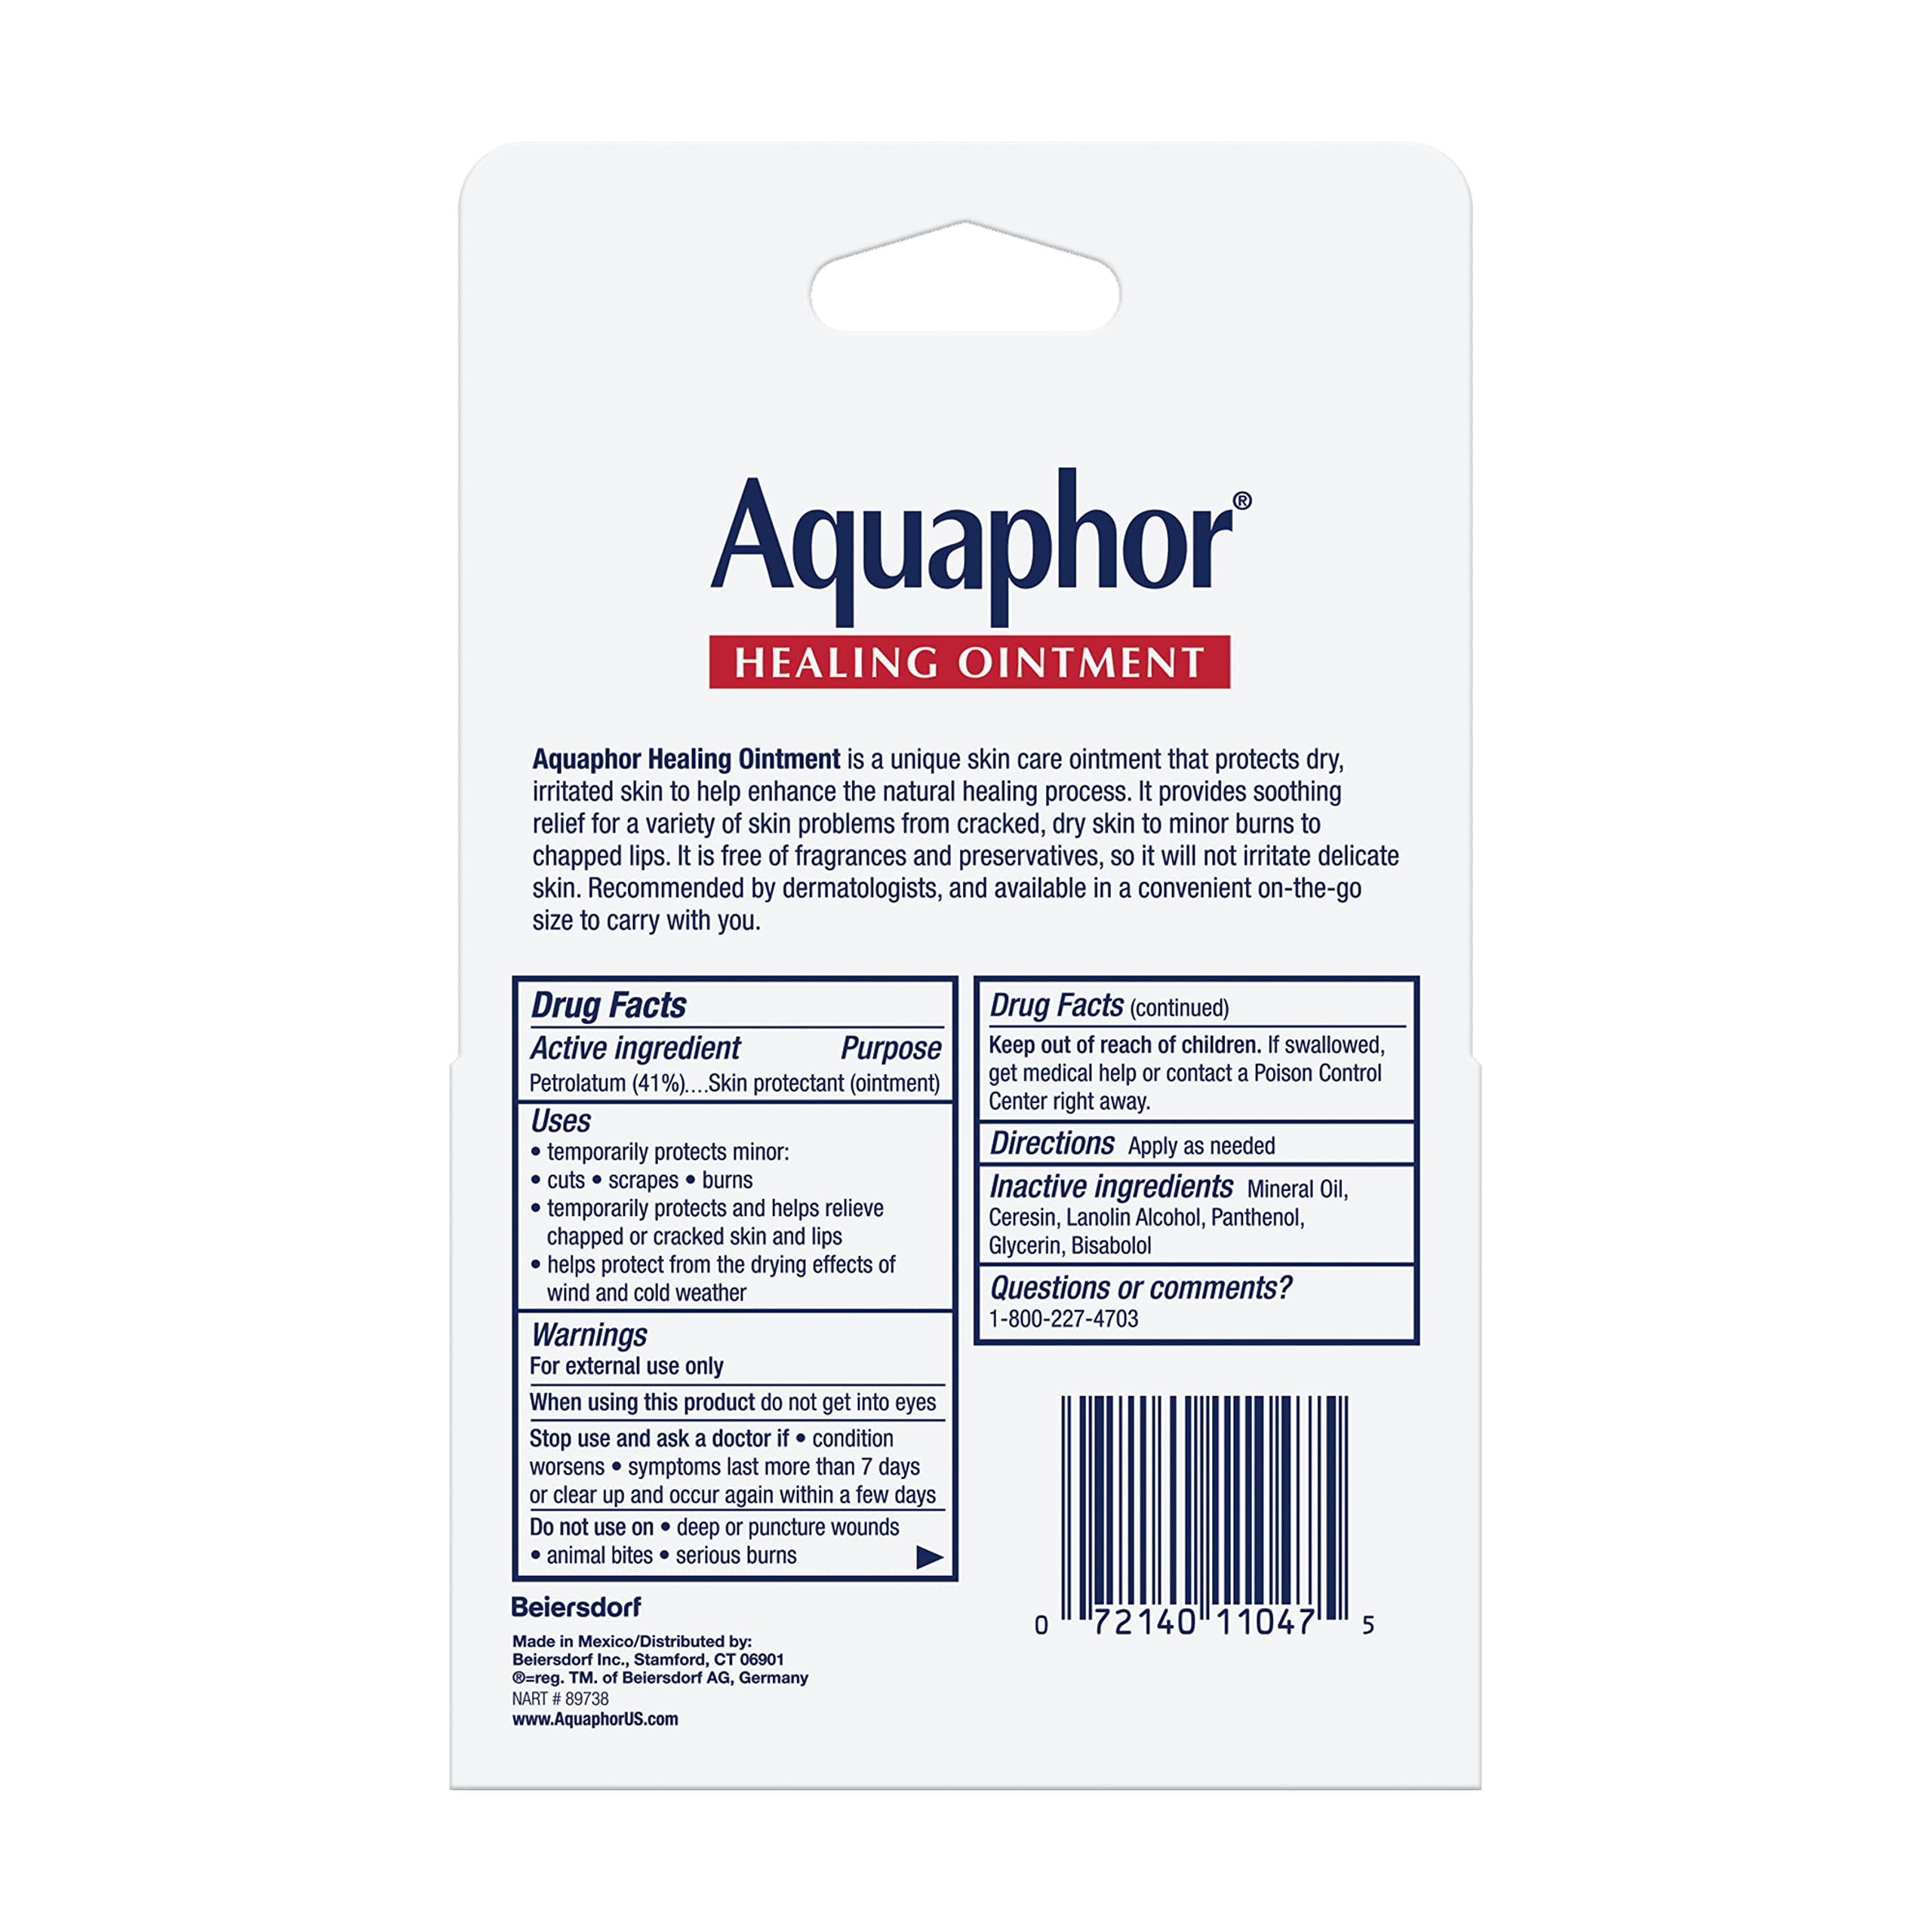 Aquaphor Healing Ointment Advanced Therapy Skin Protectant, Dry Skin Body Moisturizer, 0.35 Oz Tube, 2 Count (Pack of 1)